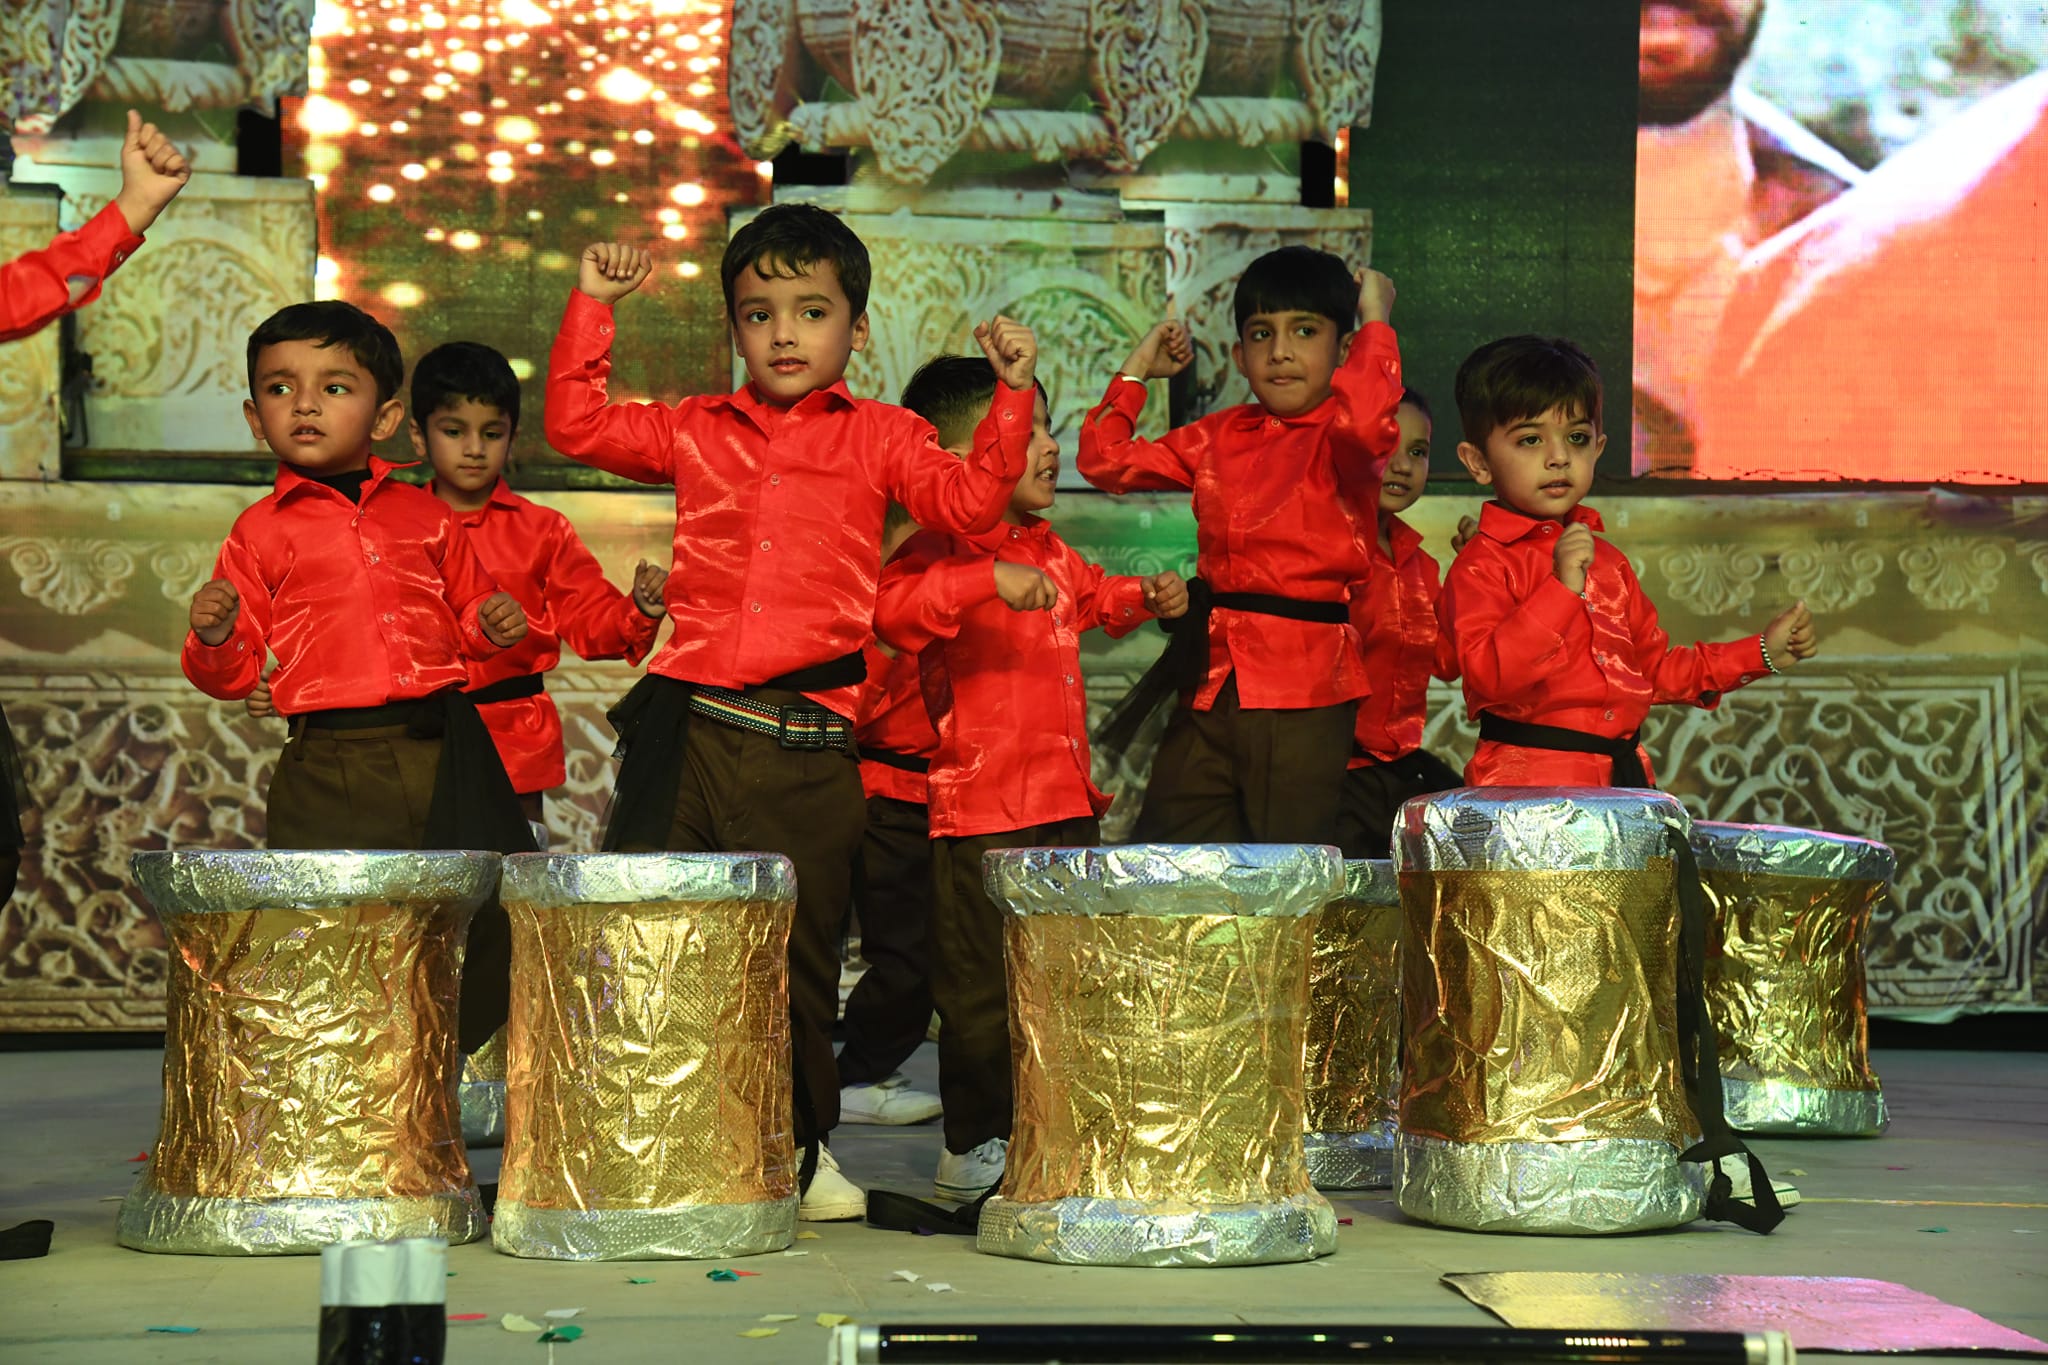 DANCE PERFORMANCE BY PRE-PRIMARY BOYS